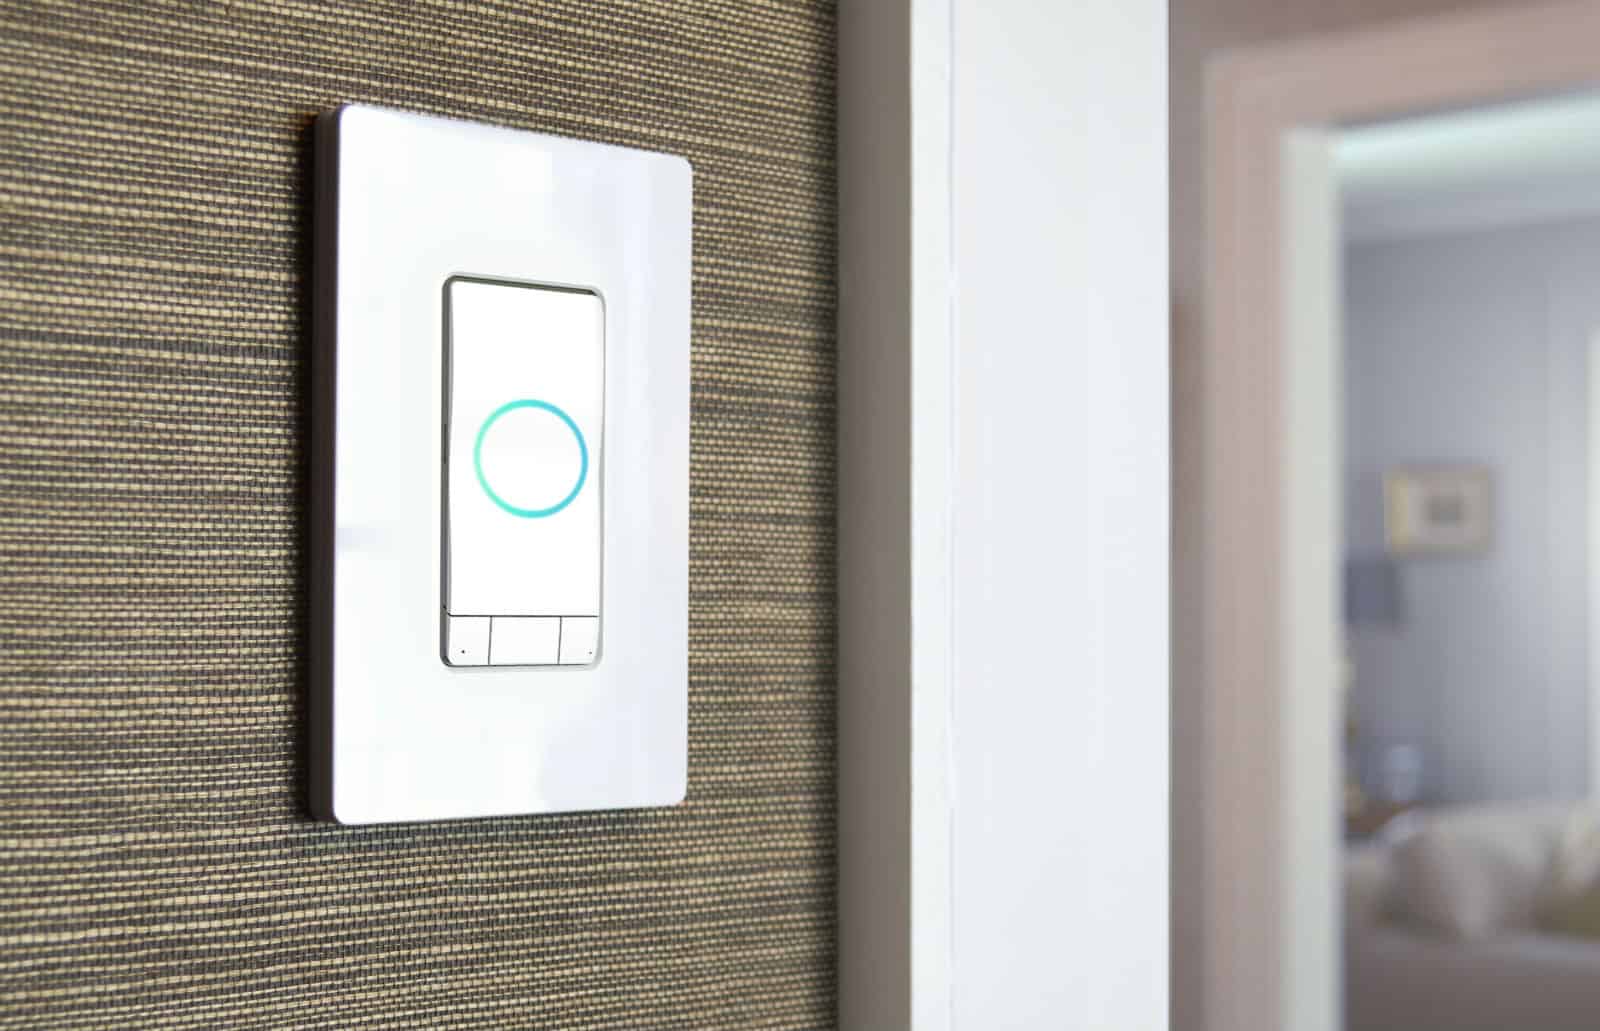 The Instinct smart light switch packs a smart speaker and also works with HomeKit.